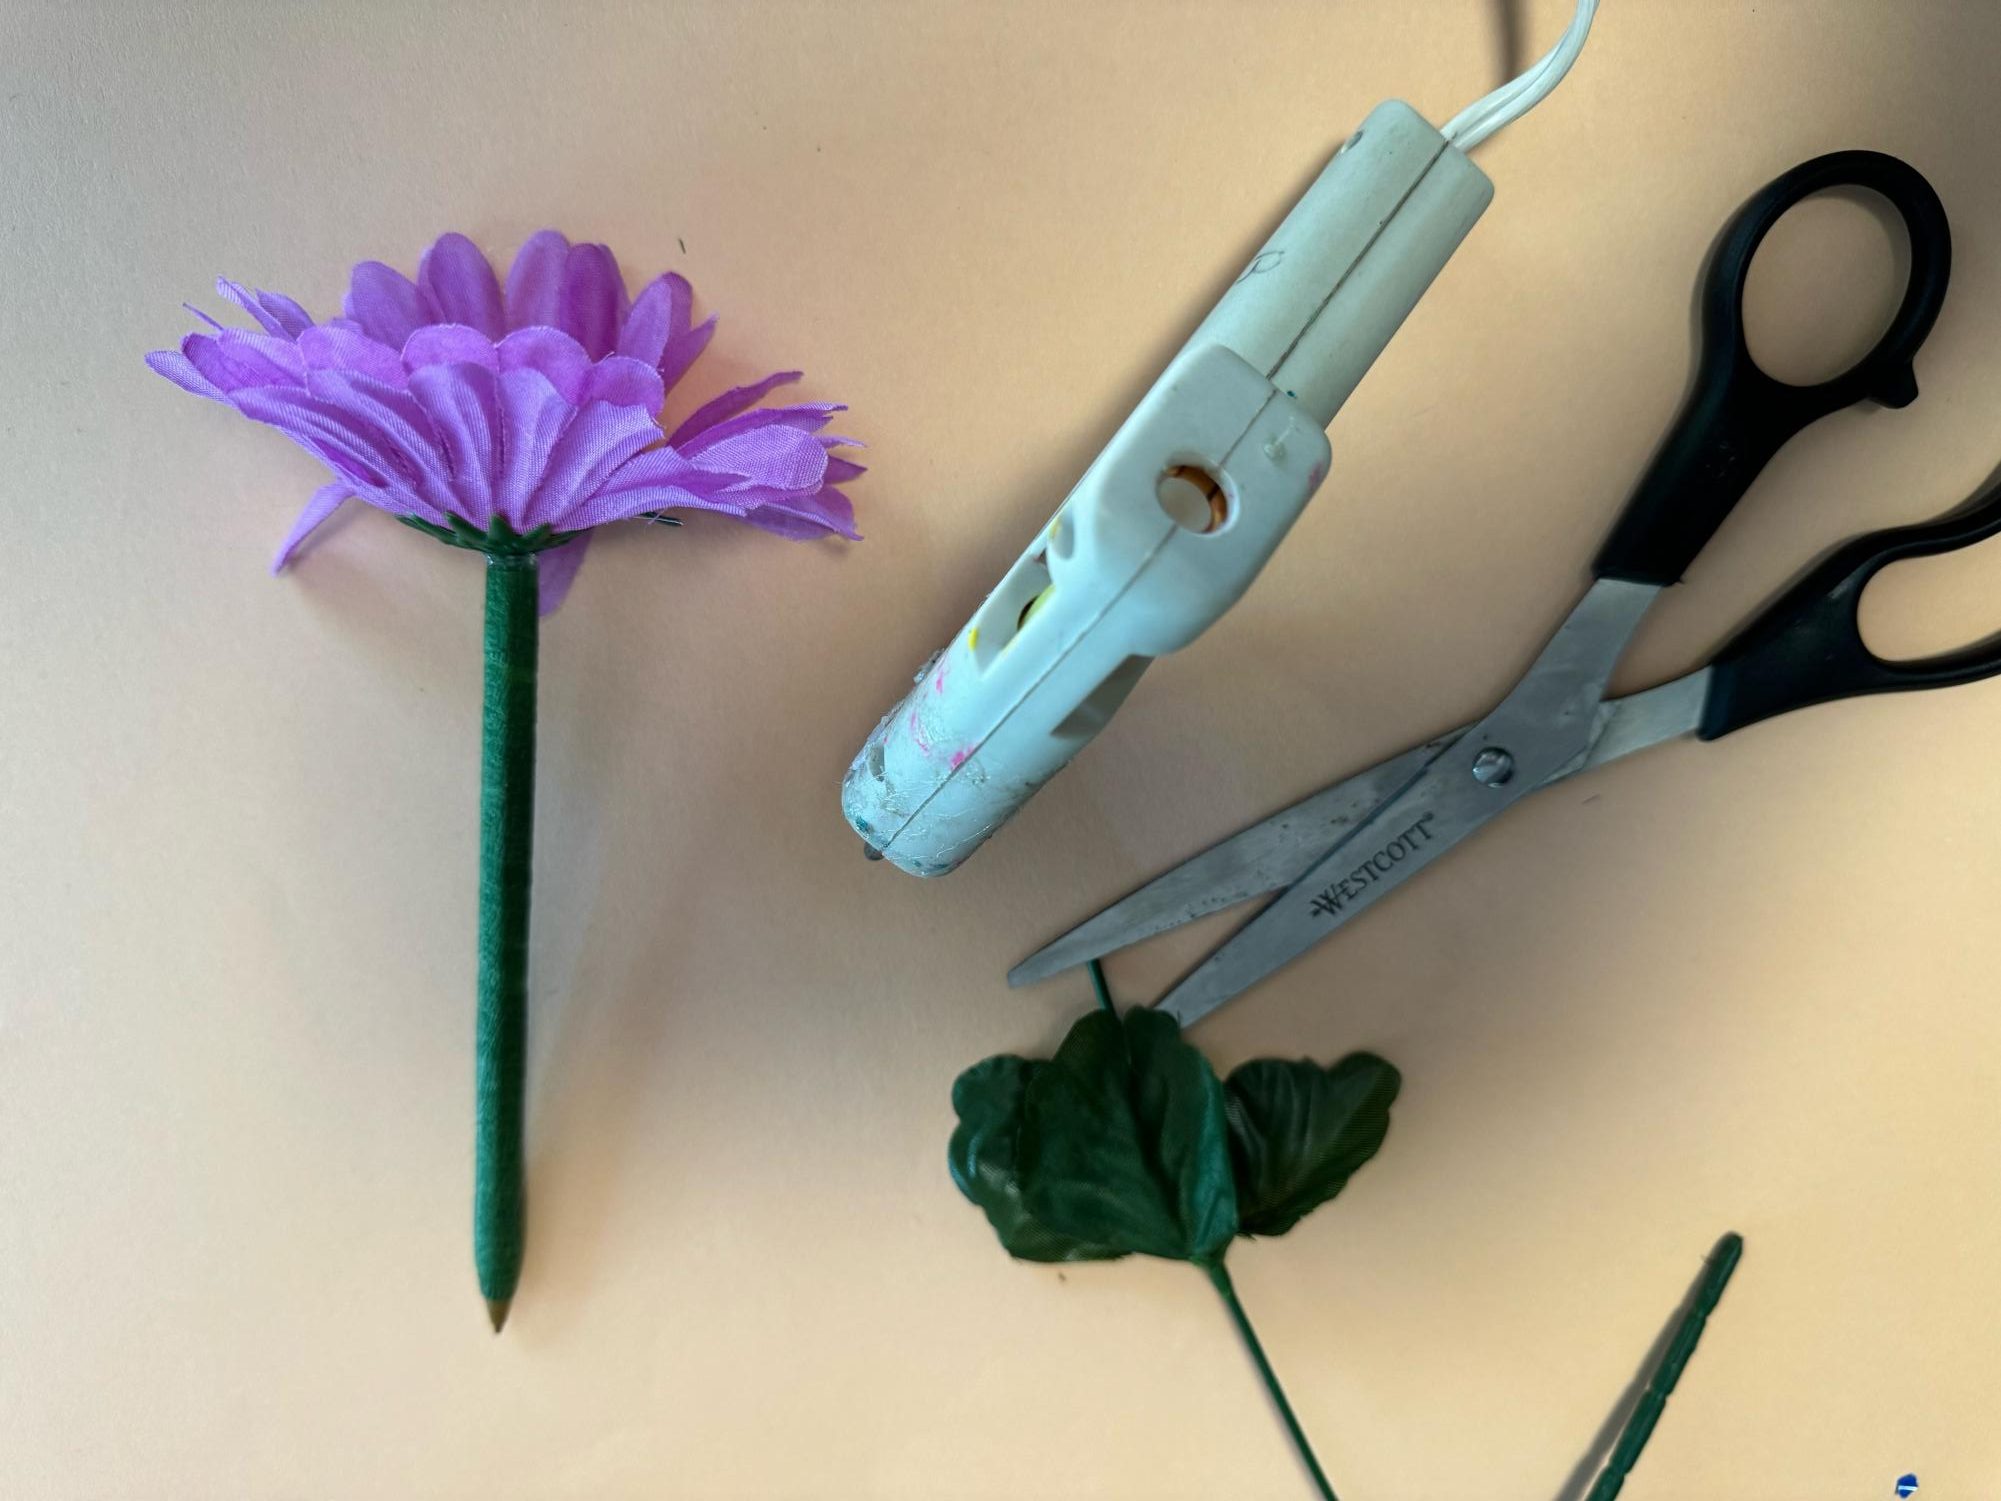 Step 3: cut a flower off its stem and glue it to the pen.